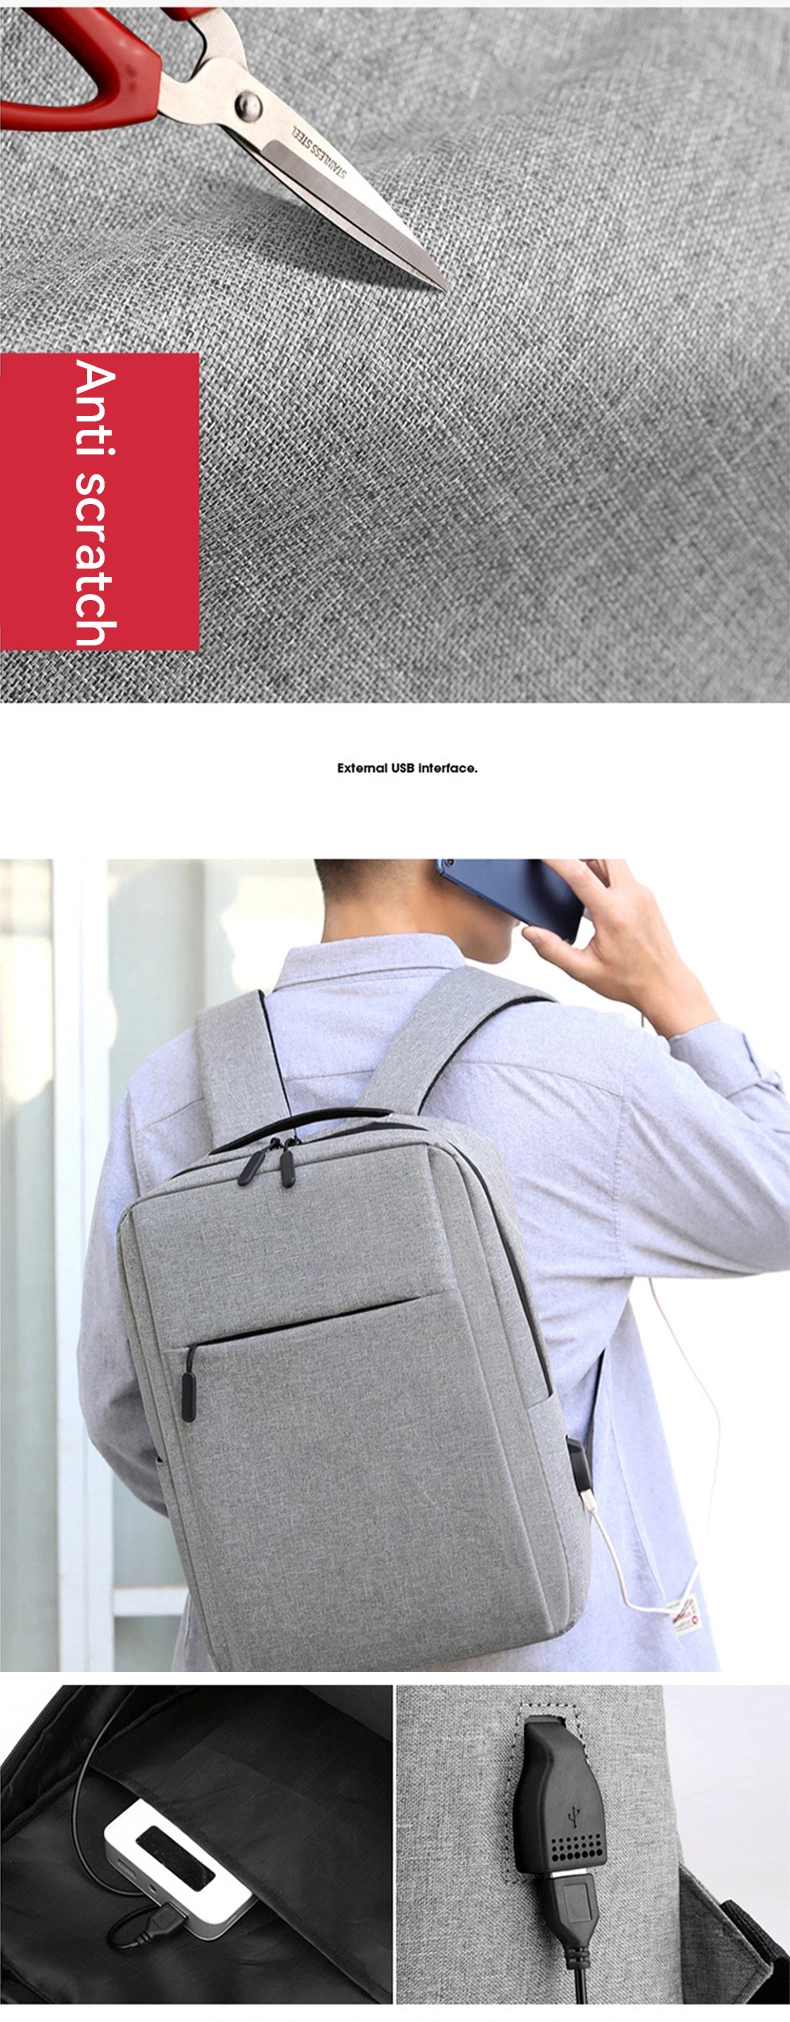 Hot Sales Luxury Business Laptop Backpack Bags Urban Casual Business Backpack with USB Port Size High Quality Business Men Antit